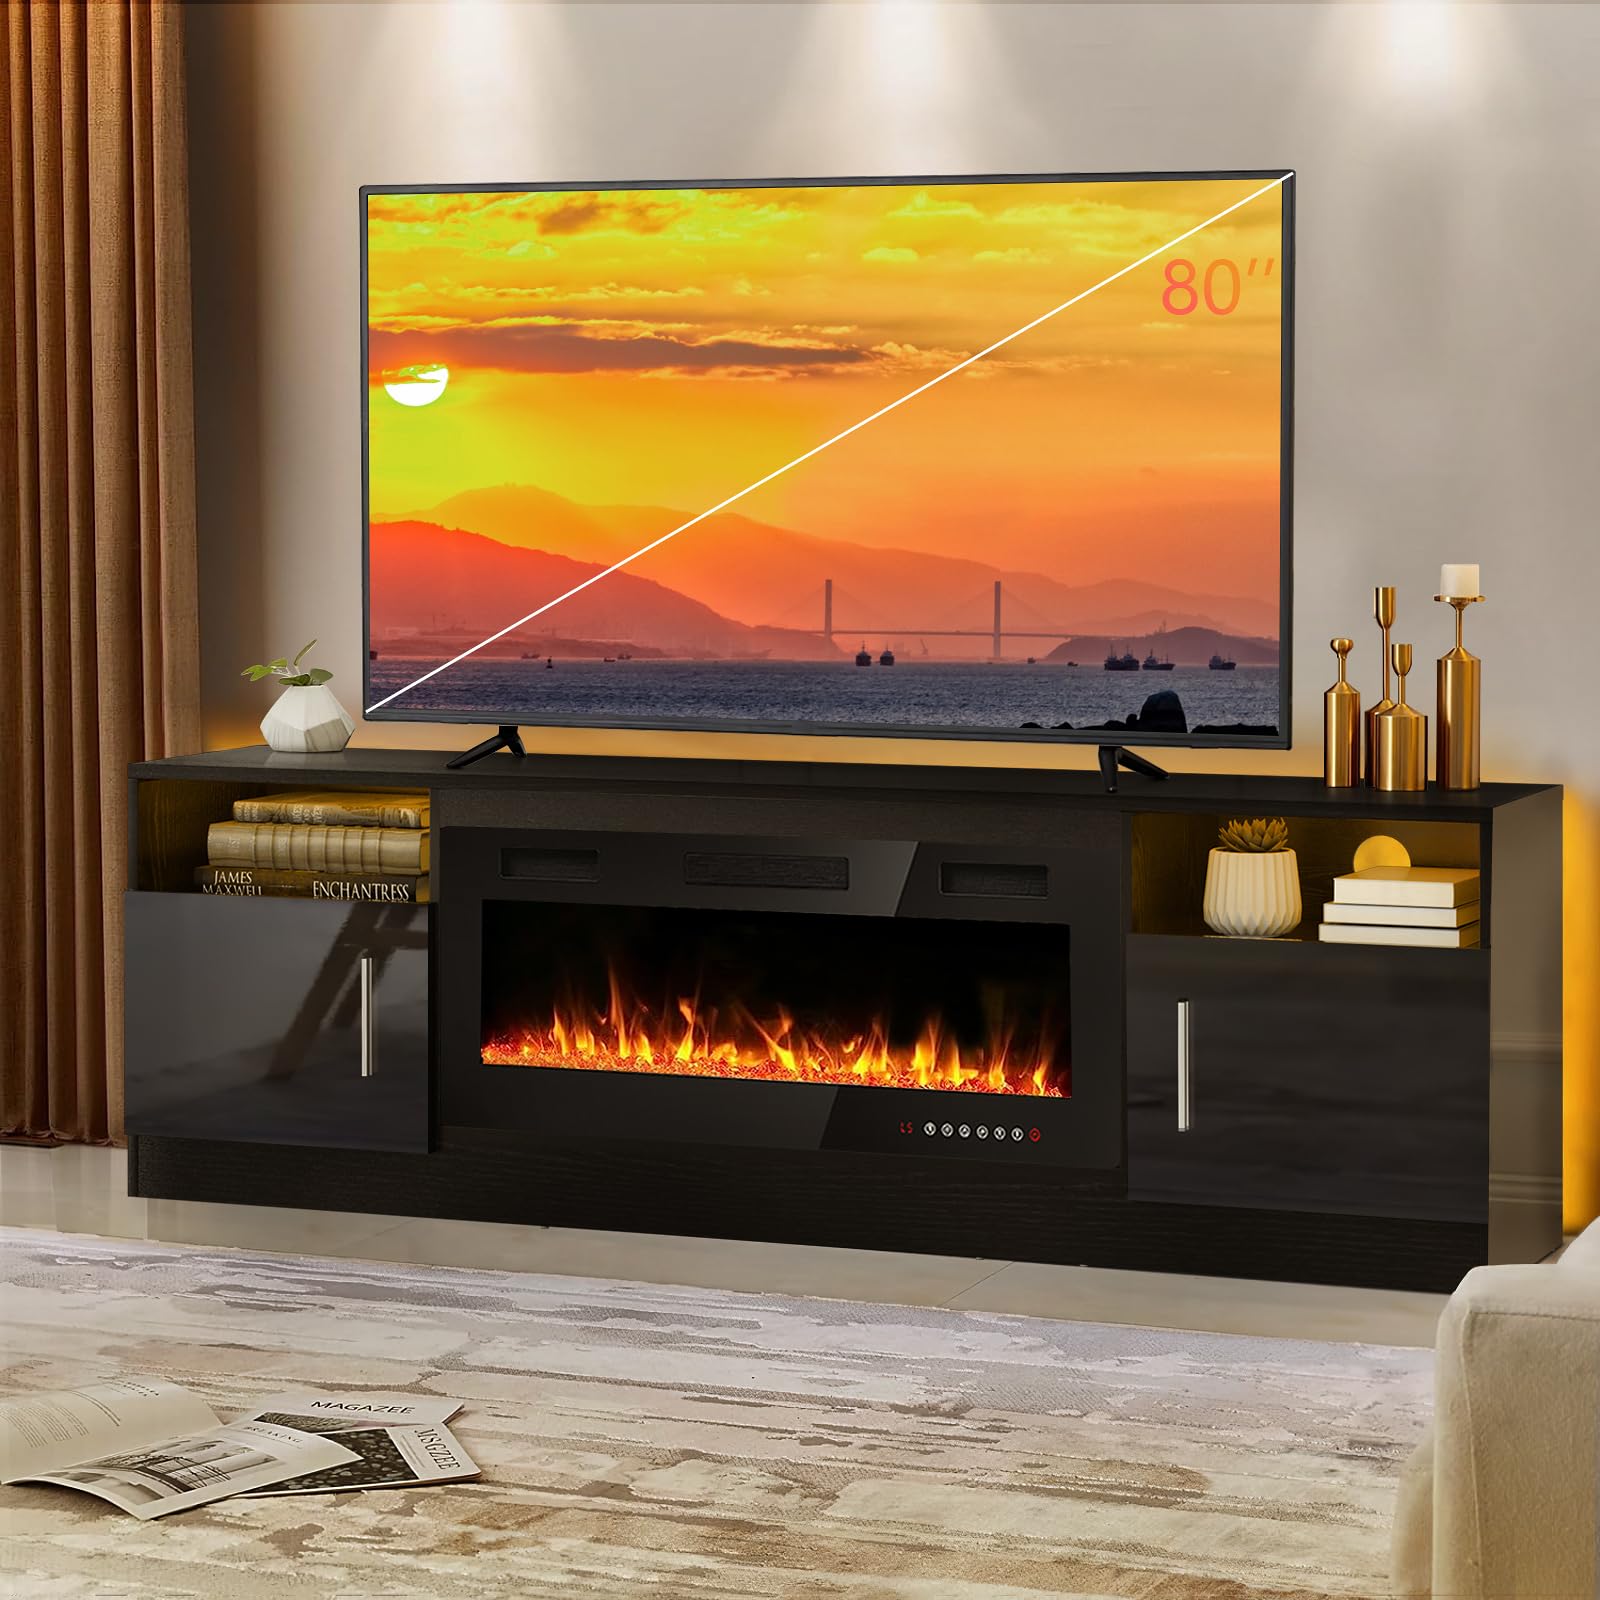 Fireplace tv Stand with 36 inch Fireplace Up to 80" TVs